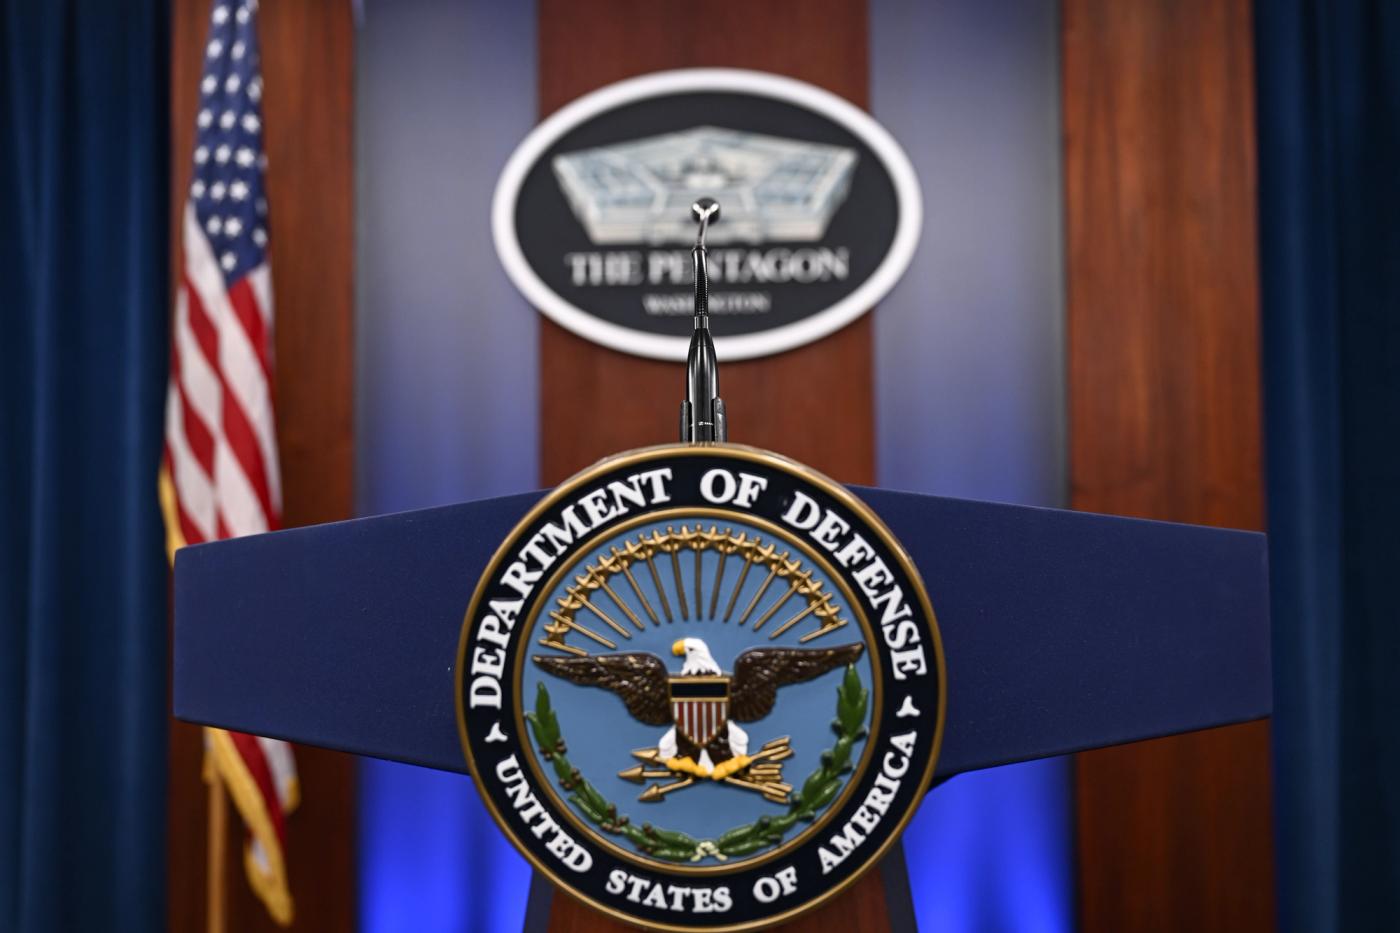 Department of Defense and Pentagon logos are seen ahead of a press conference at the Pentagon in Washington D.C.